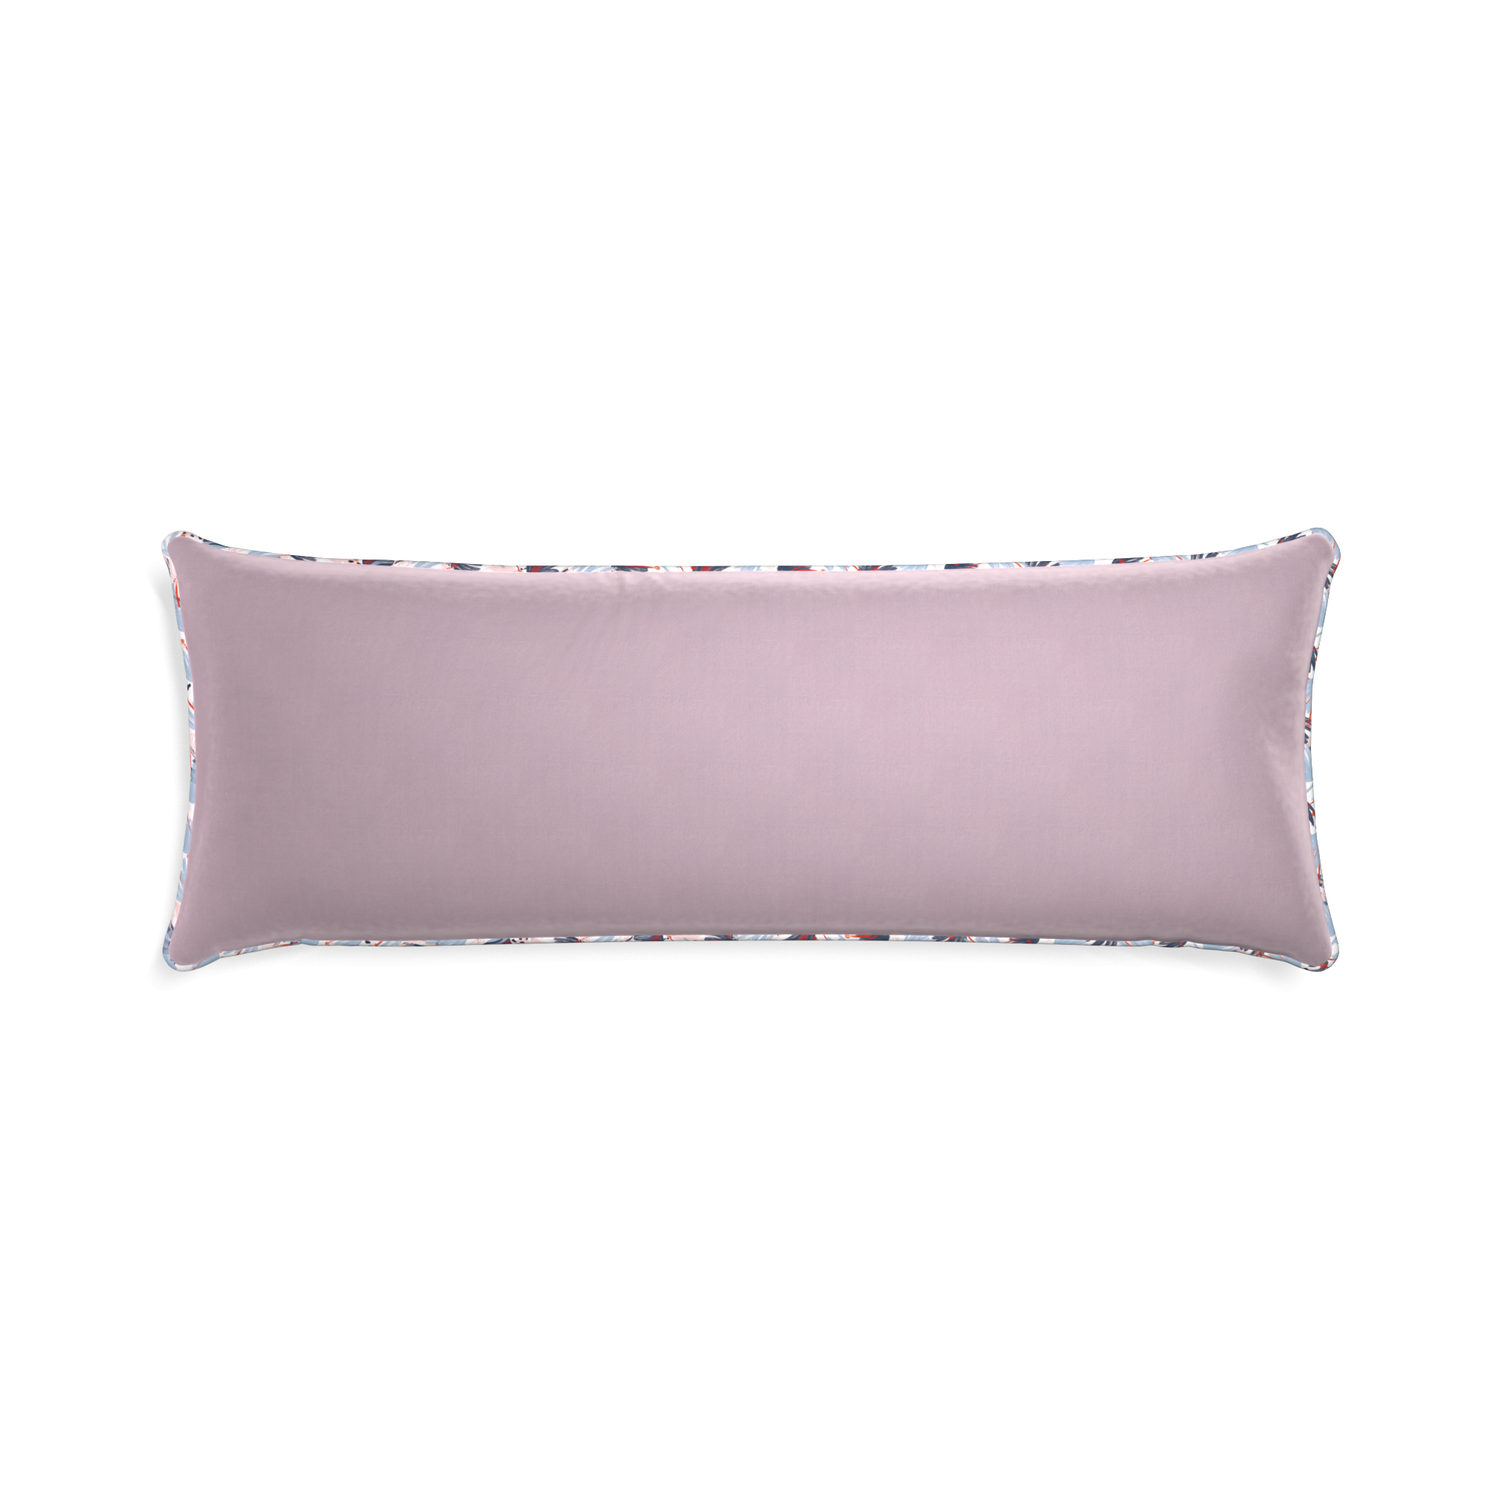 Xl-lumbar lilac velvet custom pillow with e piping on white background